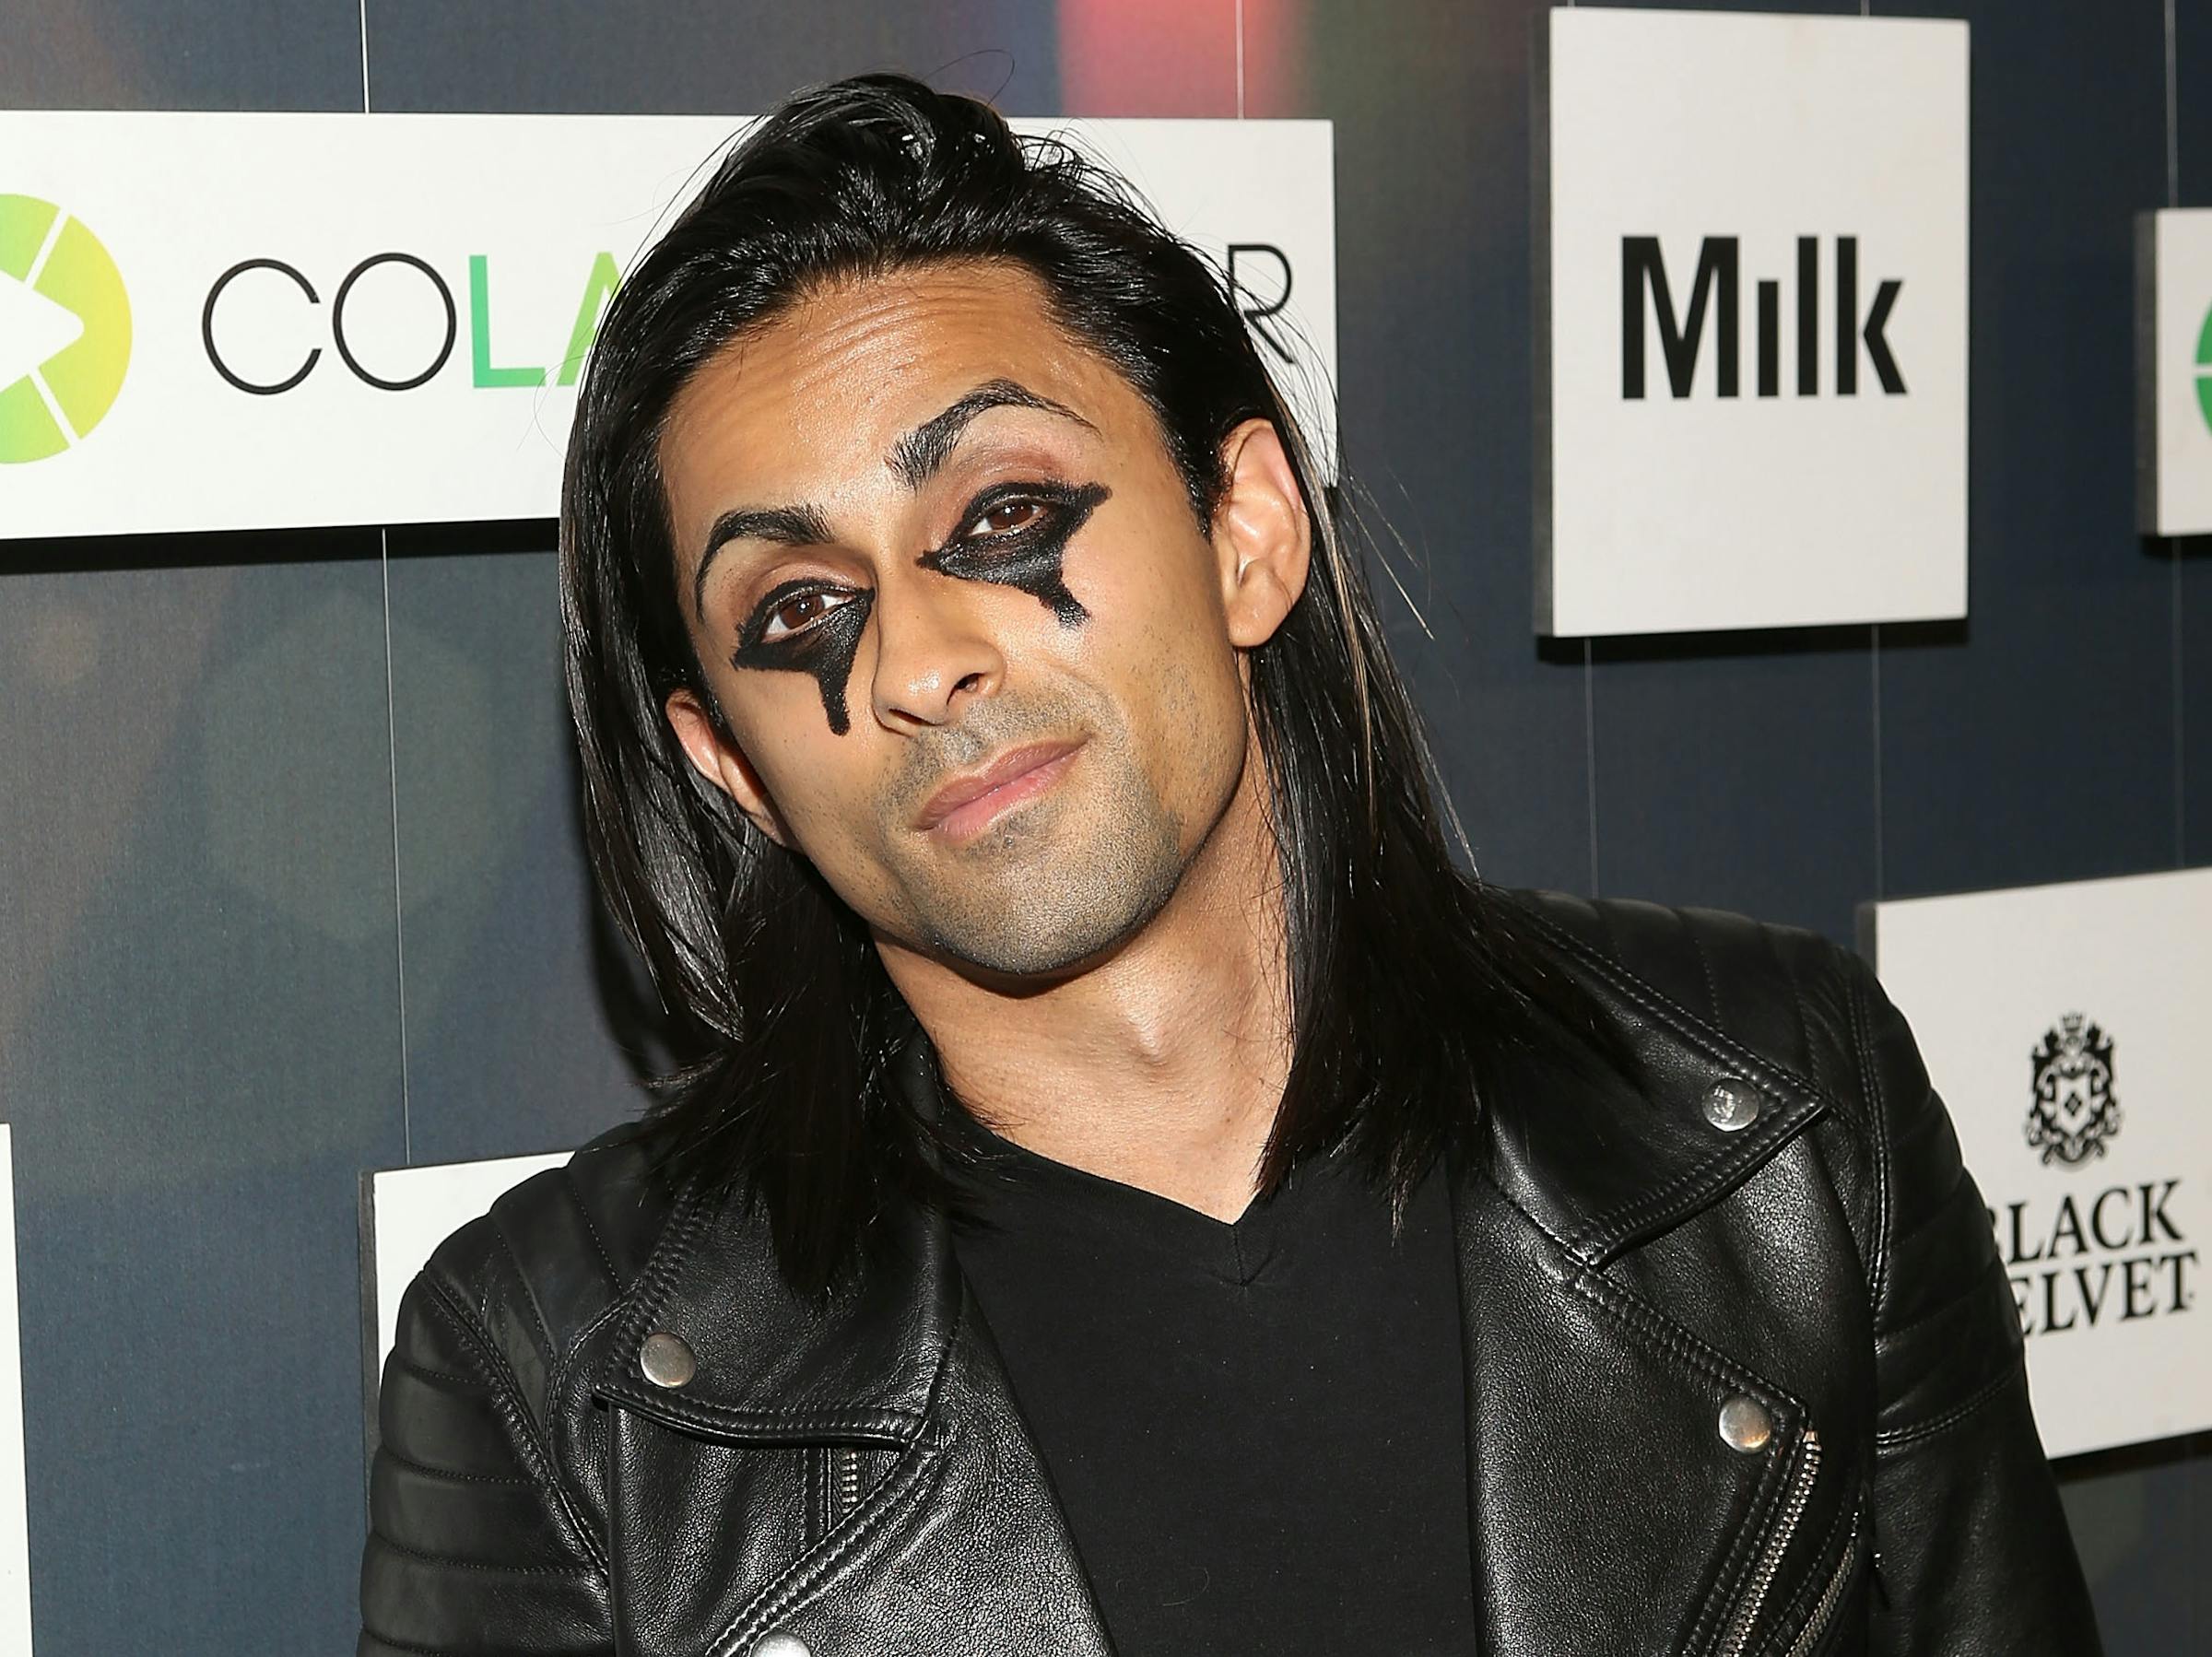 The 38-year old son of father (?) and mother(?) Adi Shankar in 2023 photo. Adi Shankar earned a  million dollar salary - leaving the net worth at  million in 2023